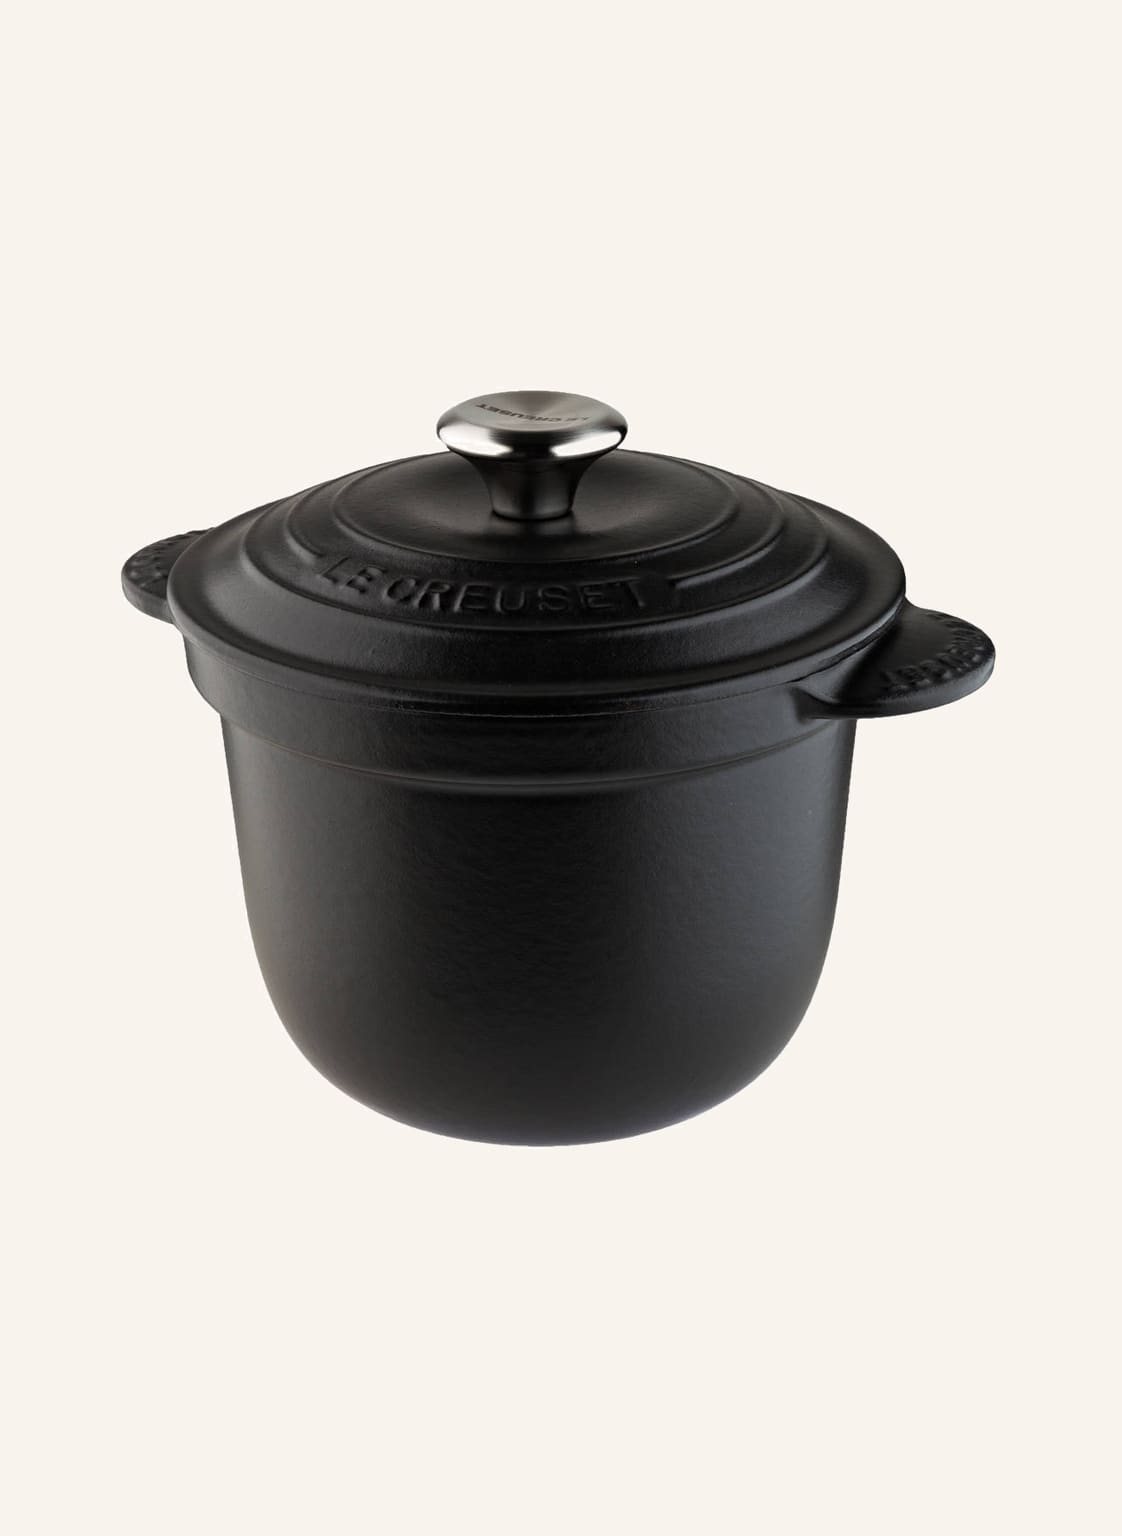 Image of Le Creuset Cocotte Every schwarz